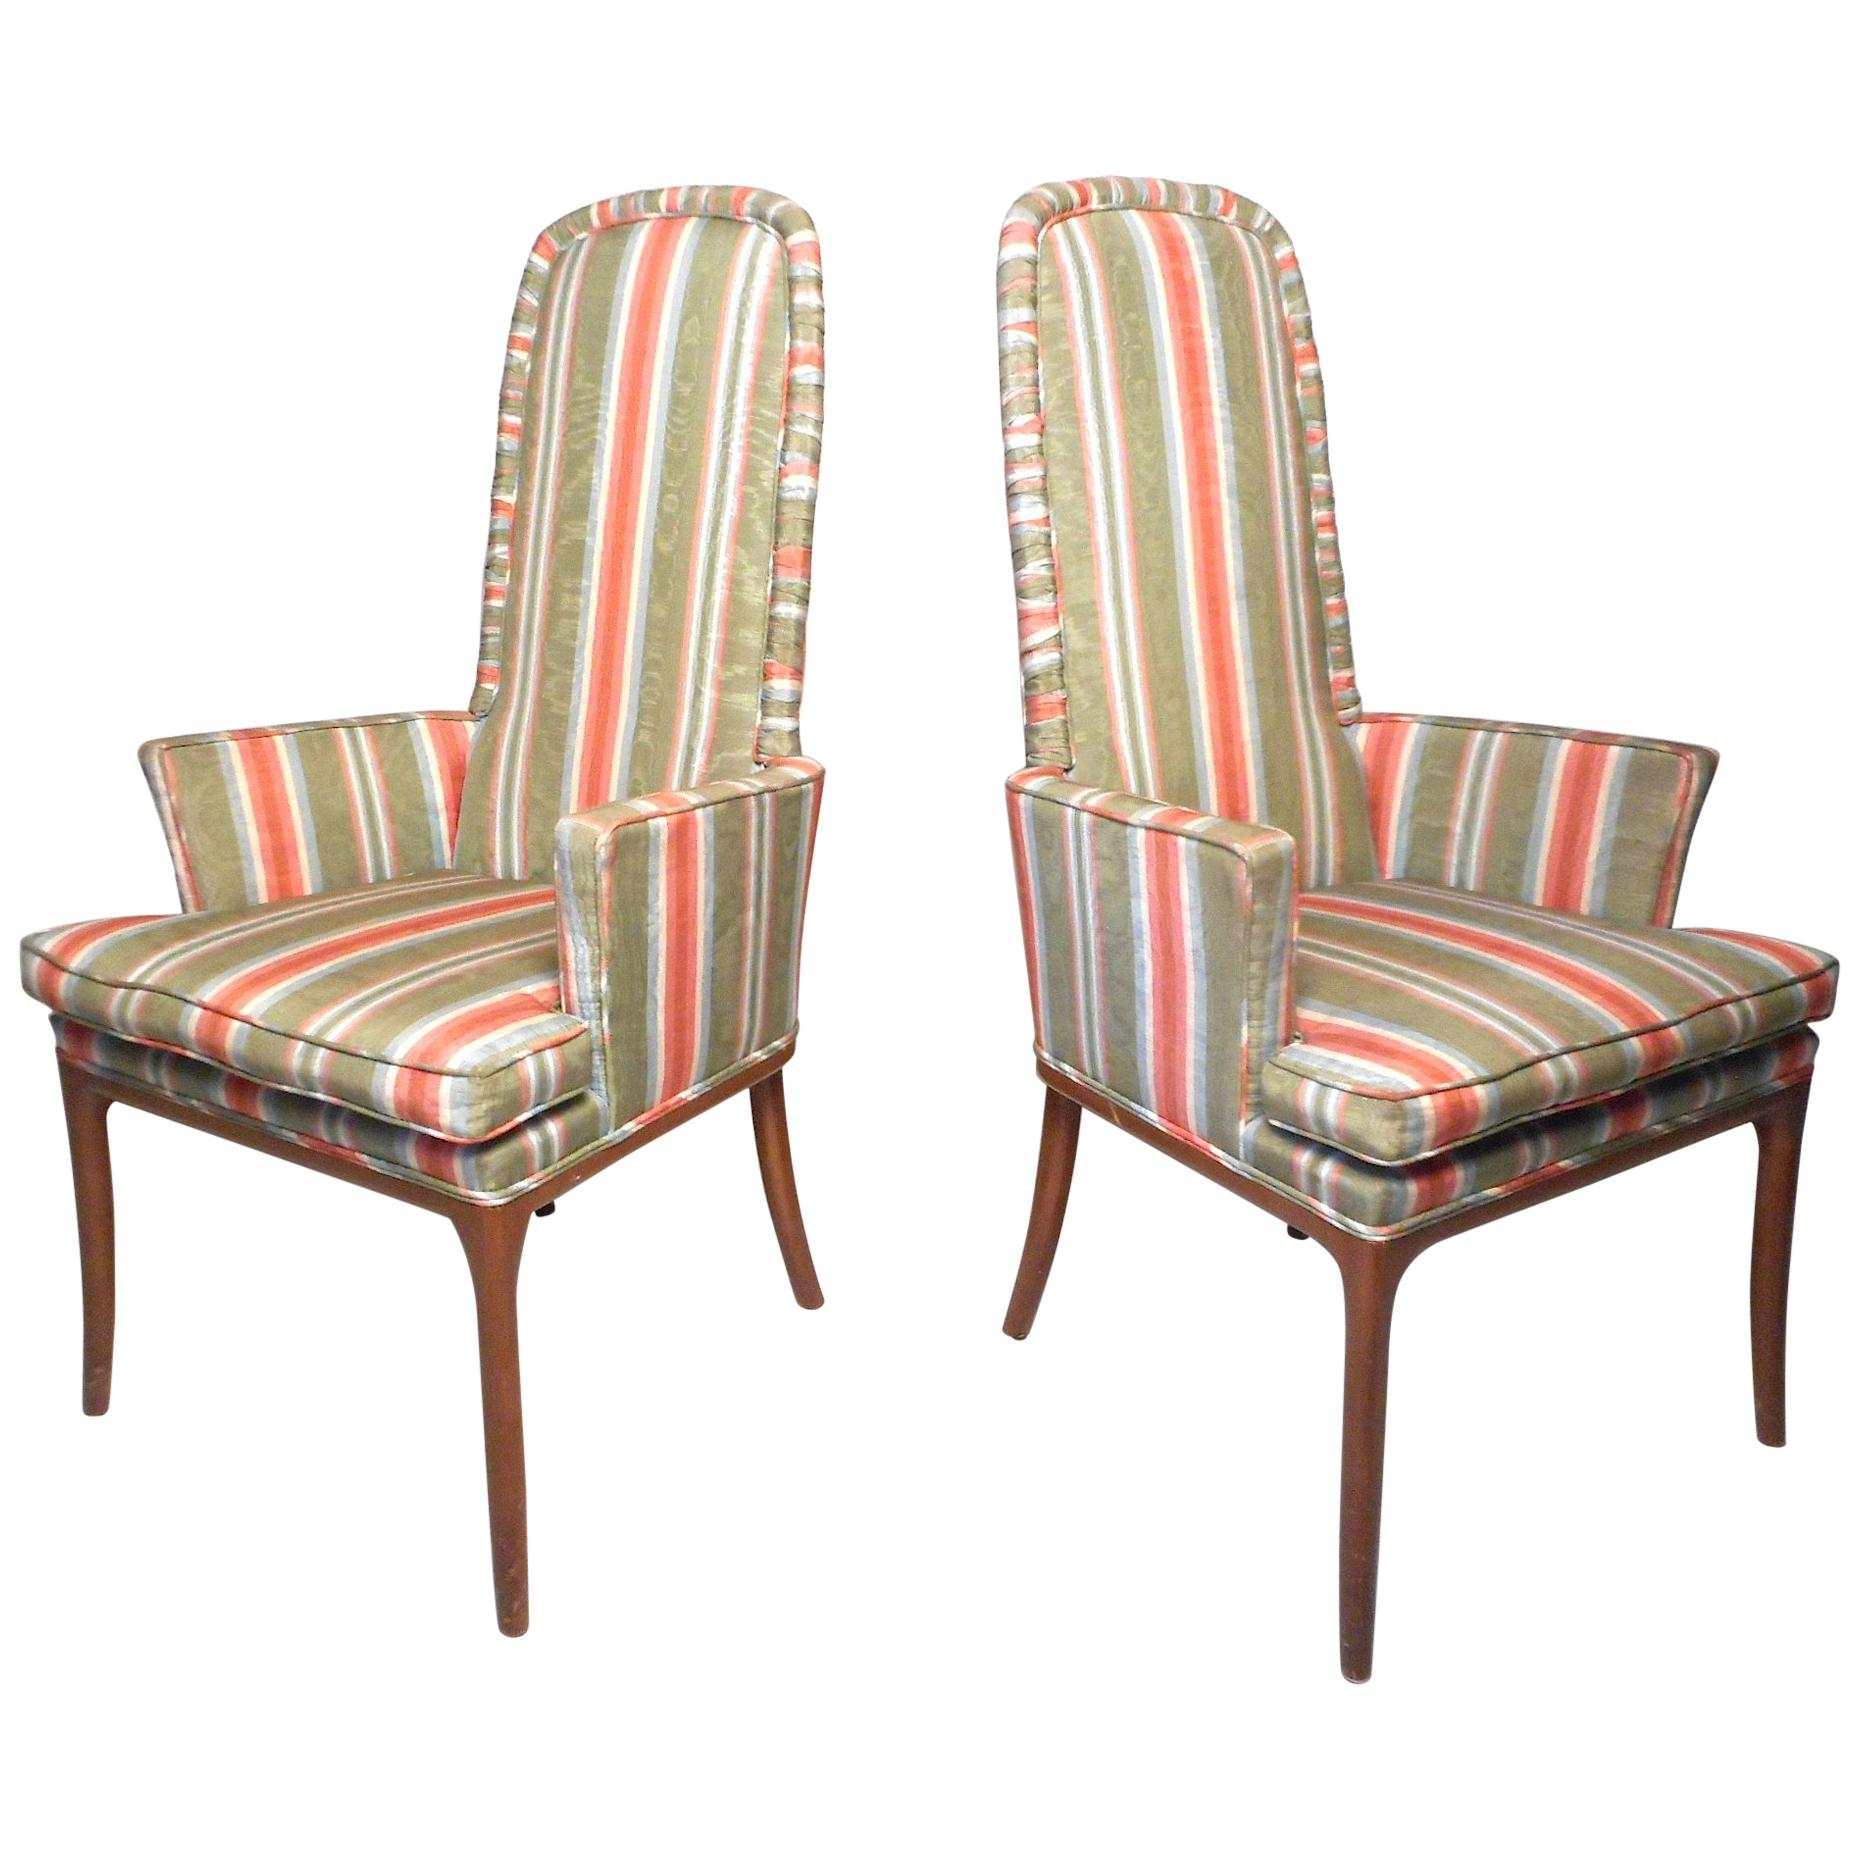 Pair of Midcentury High-Back Upholstered Chairs For Sale